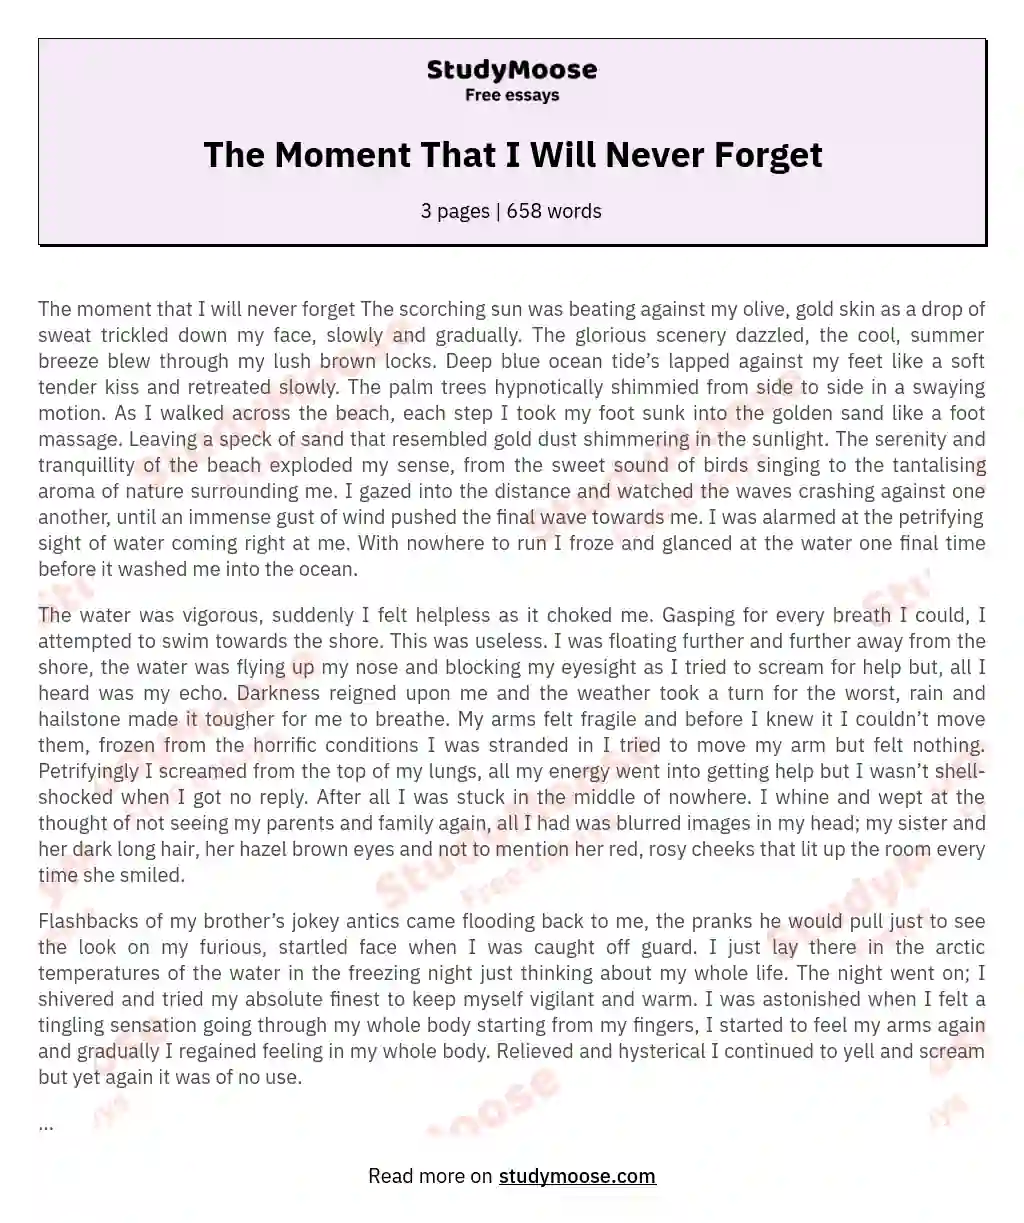 The Moment That I Will Never Forget essay